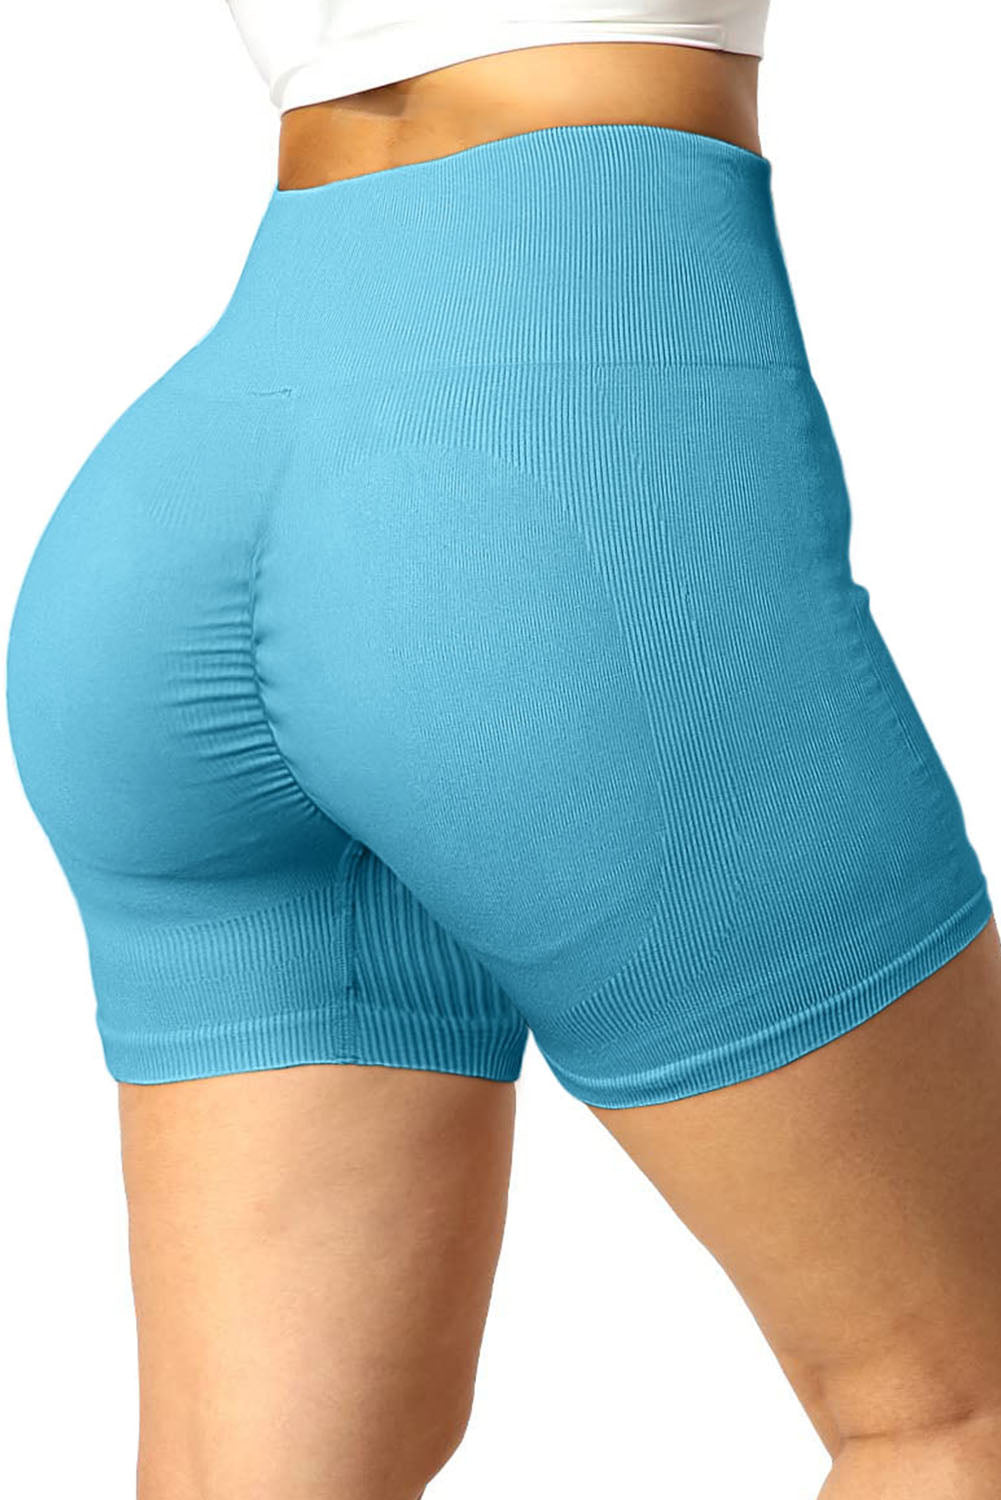 Ribbed Sports Shorts - Blue / S - Women’s Clothing & Accessories - Shorts - 13 - 2024